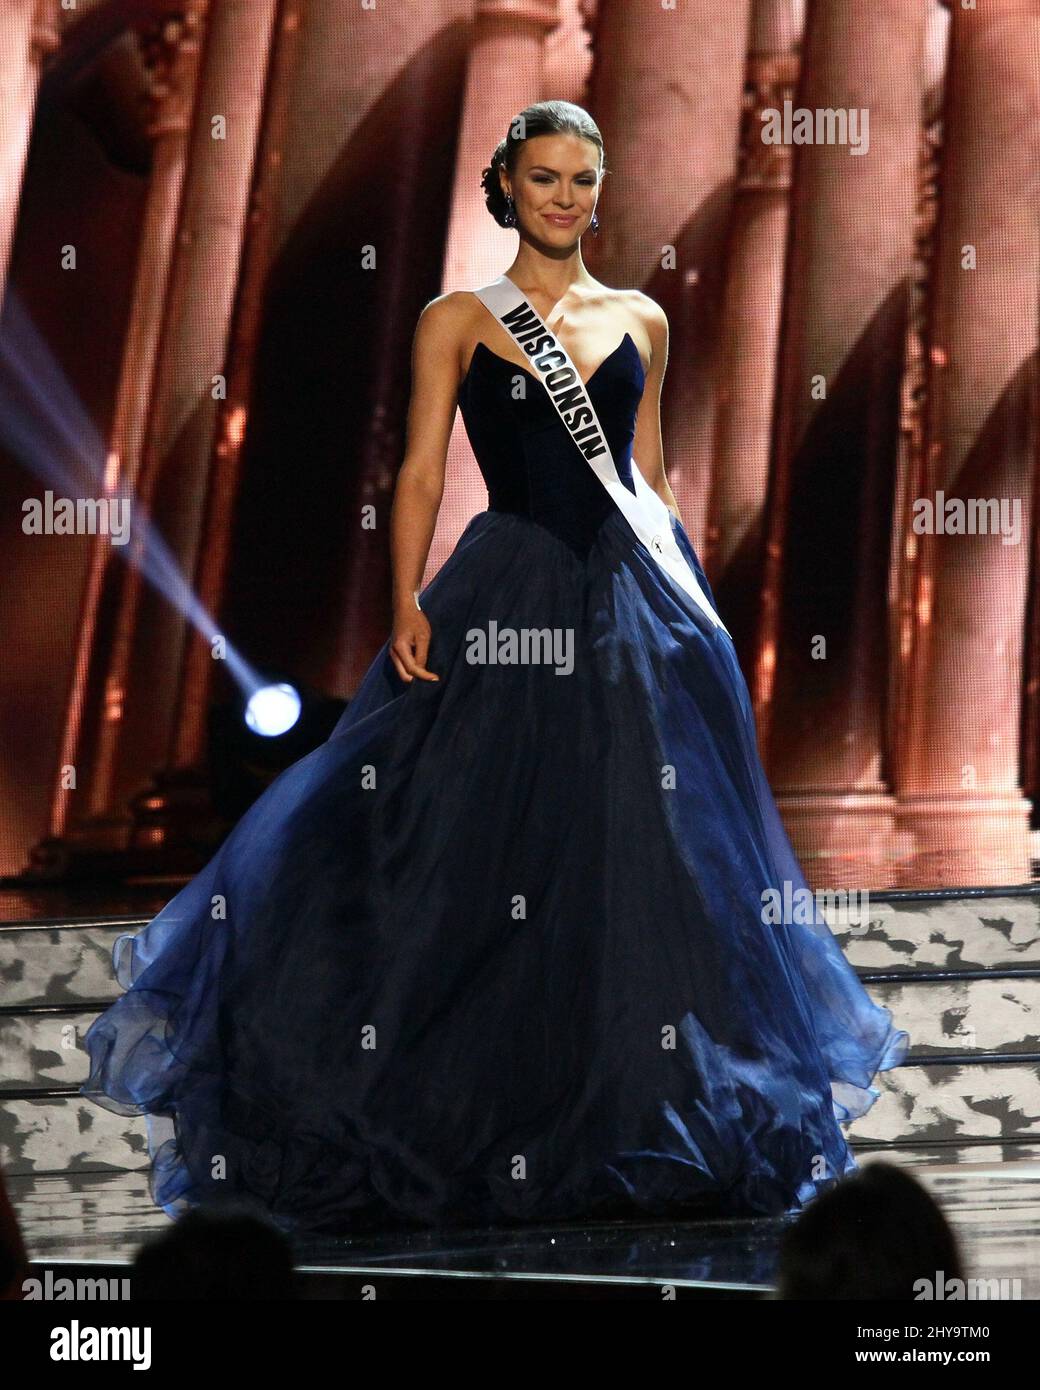 Miss Wisconsin USA, Kate Redeker on stage during the 2016 MISS USA Pageant Preliminary Competition, T-Mobile Arena, Las Vegas, NV, on June 1, 2016. Stock Photo